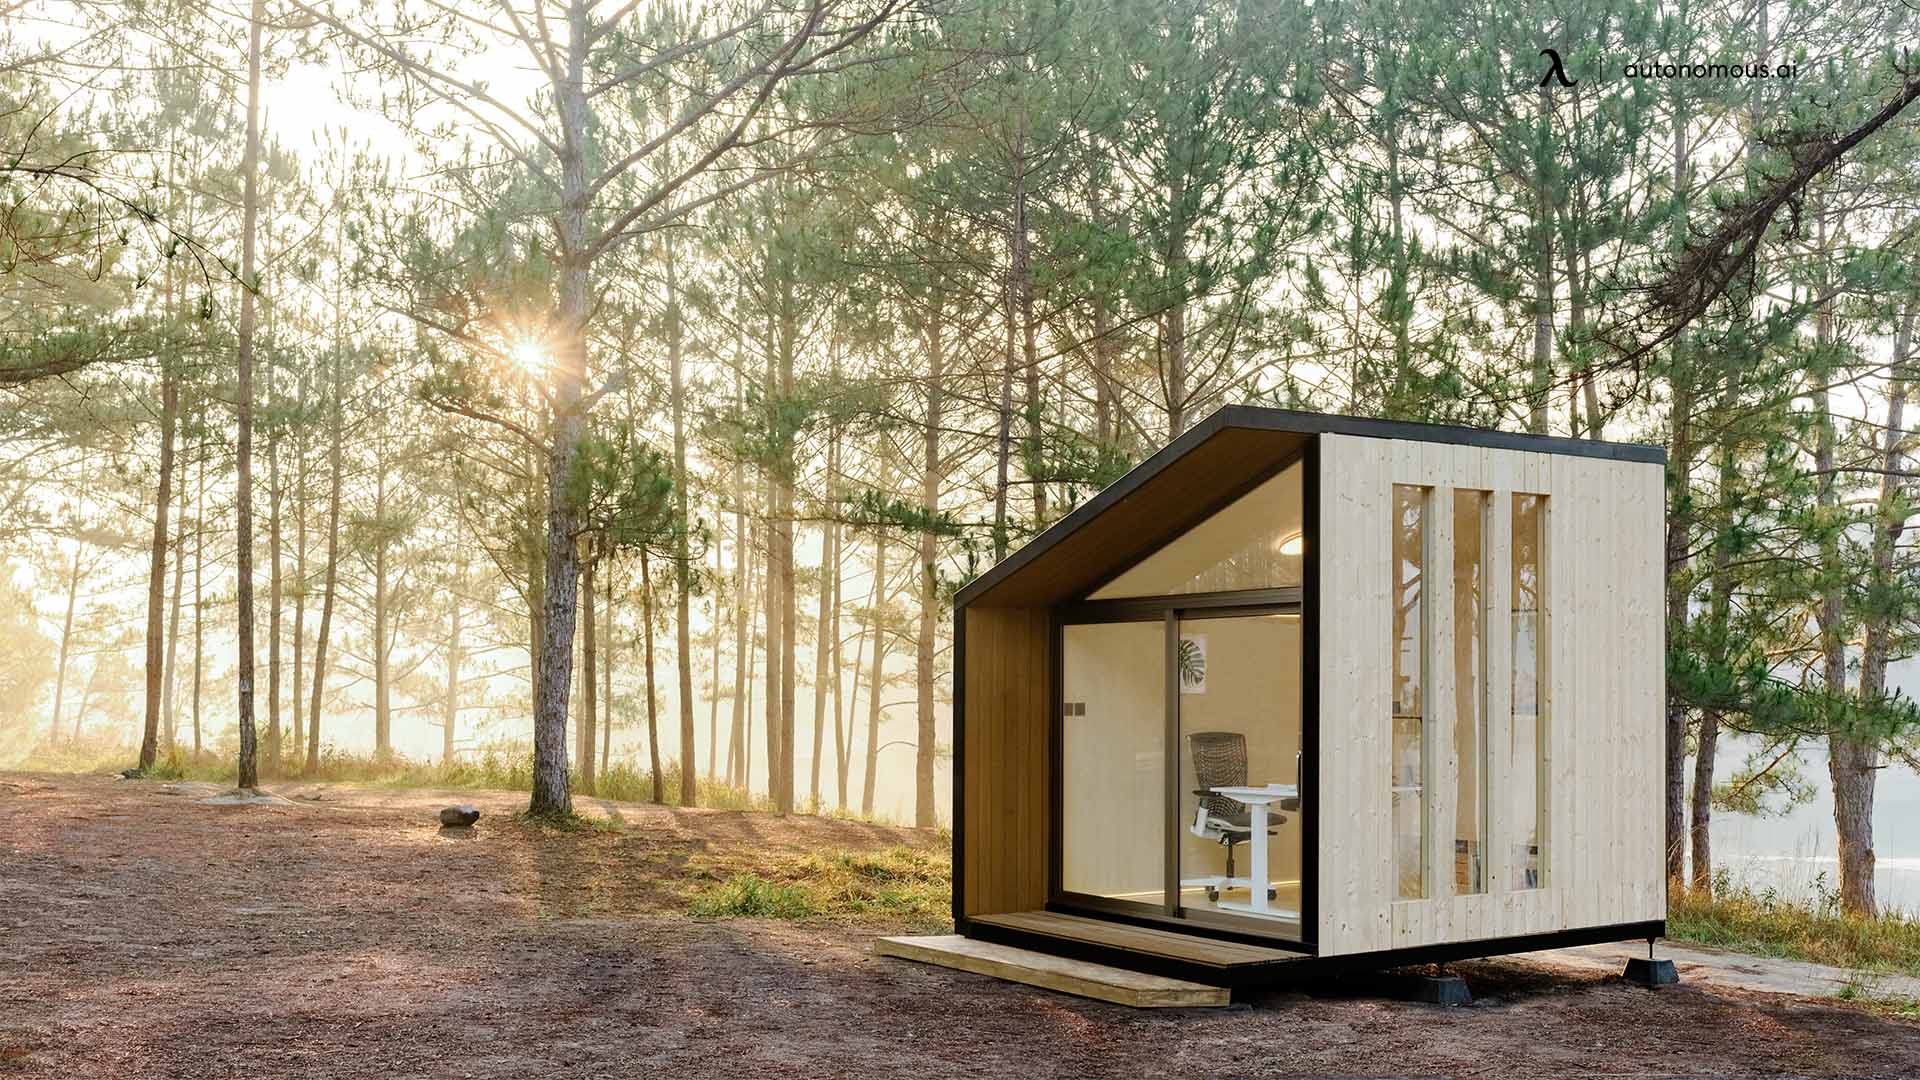 15 Amazing Garden Office Pods You'll Love (2022 Review)